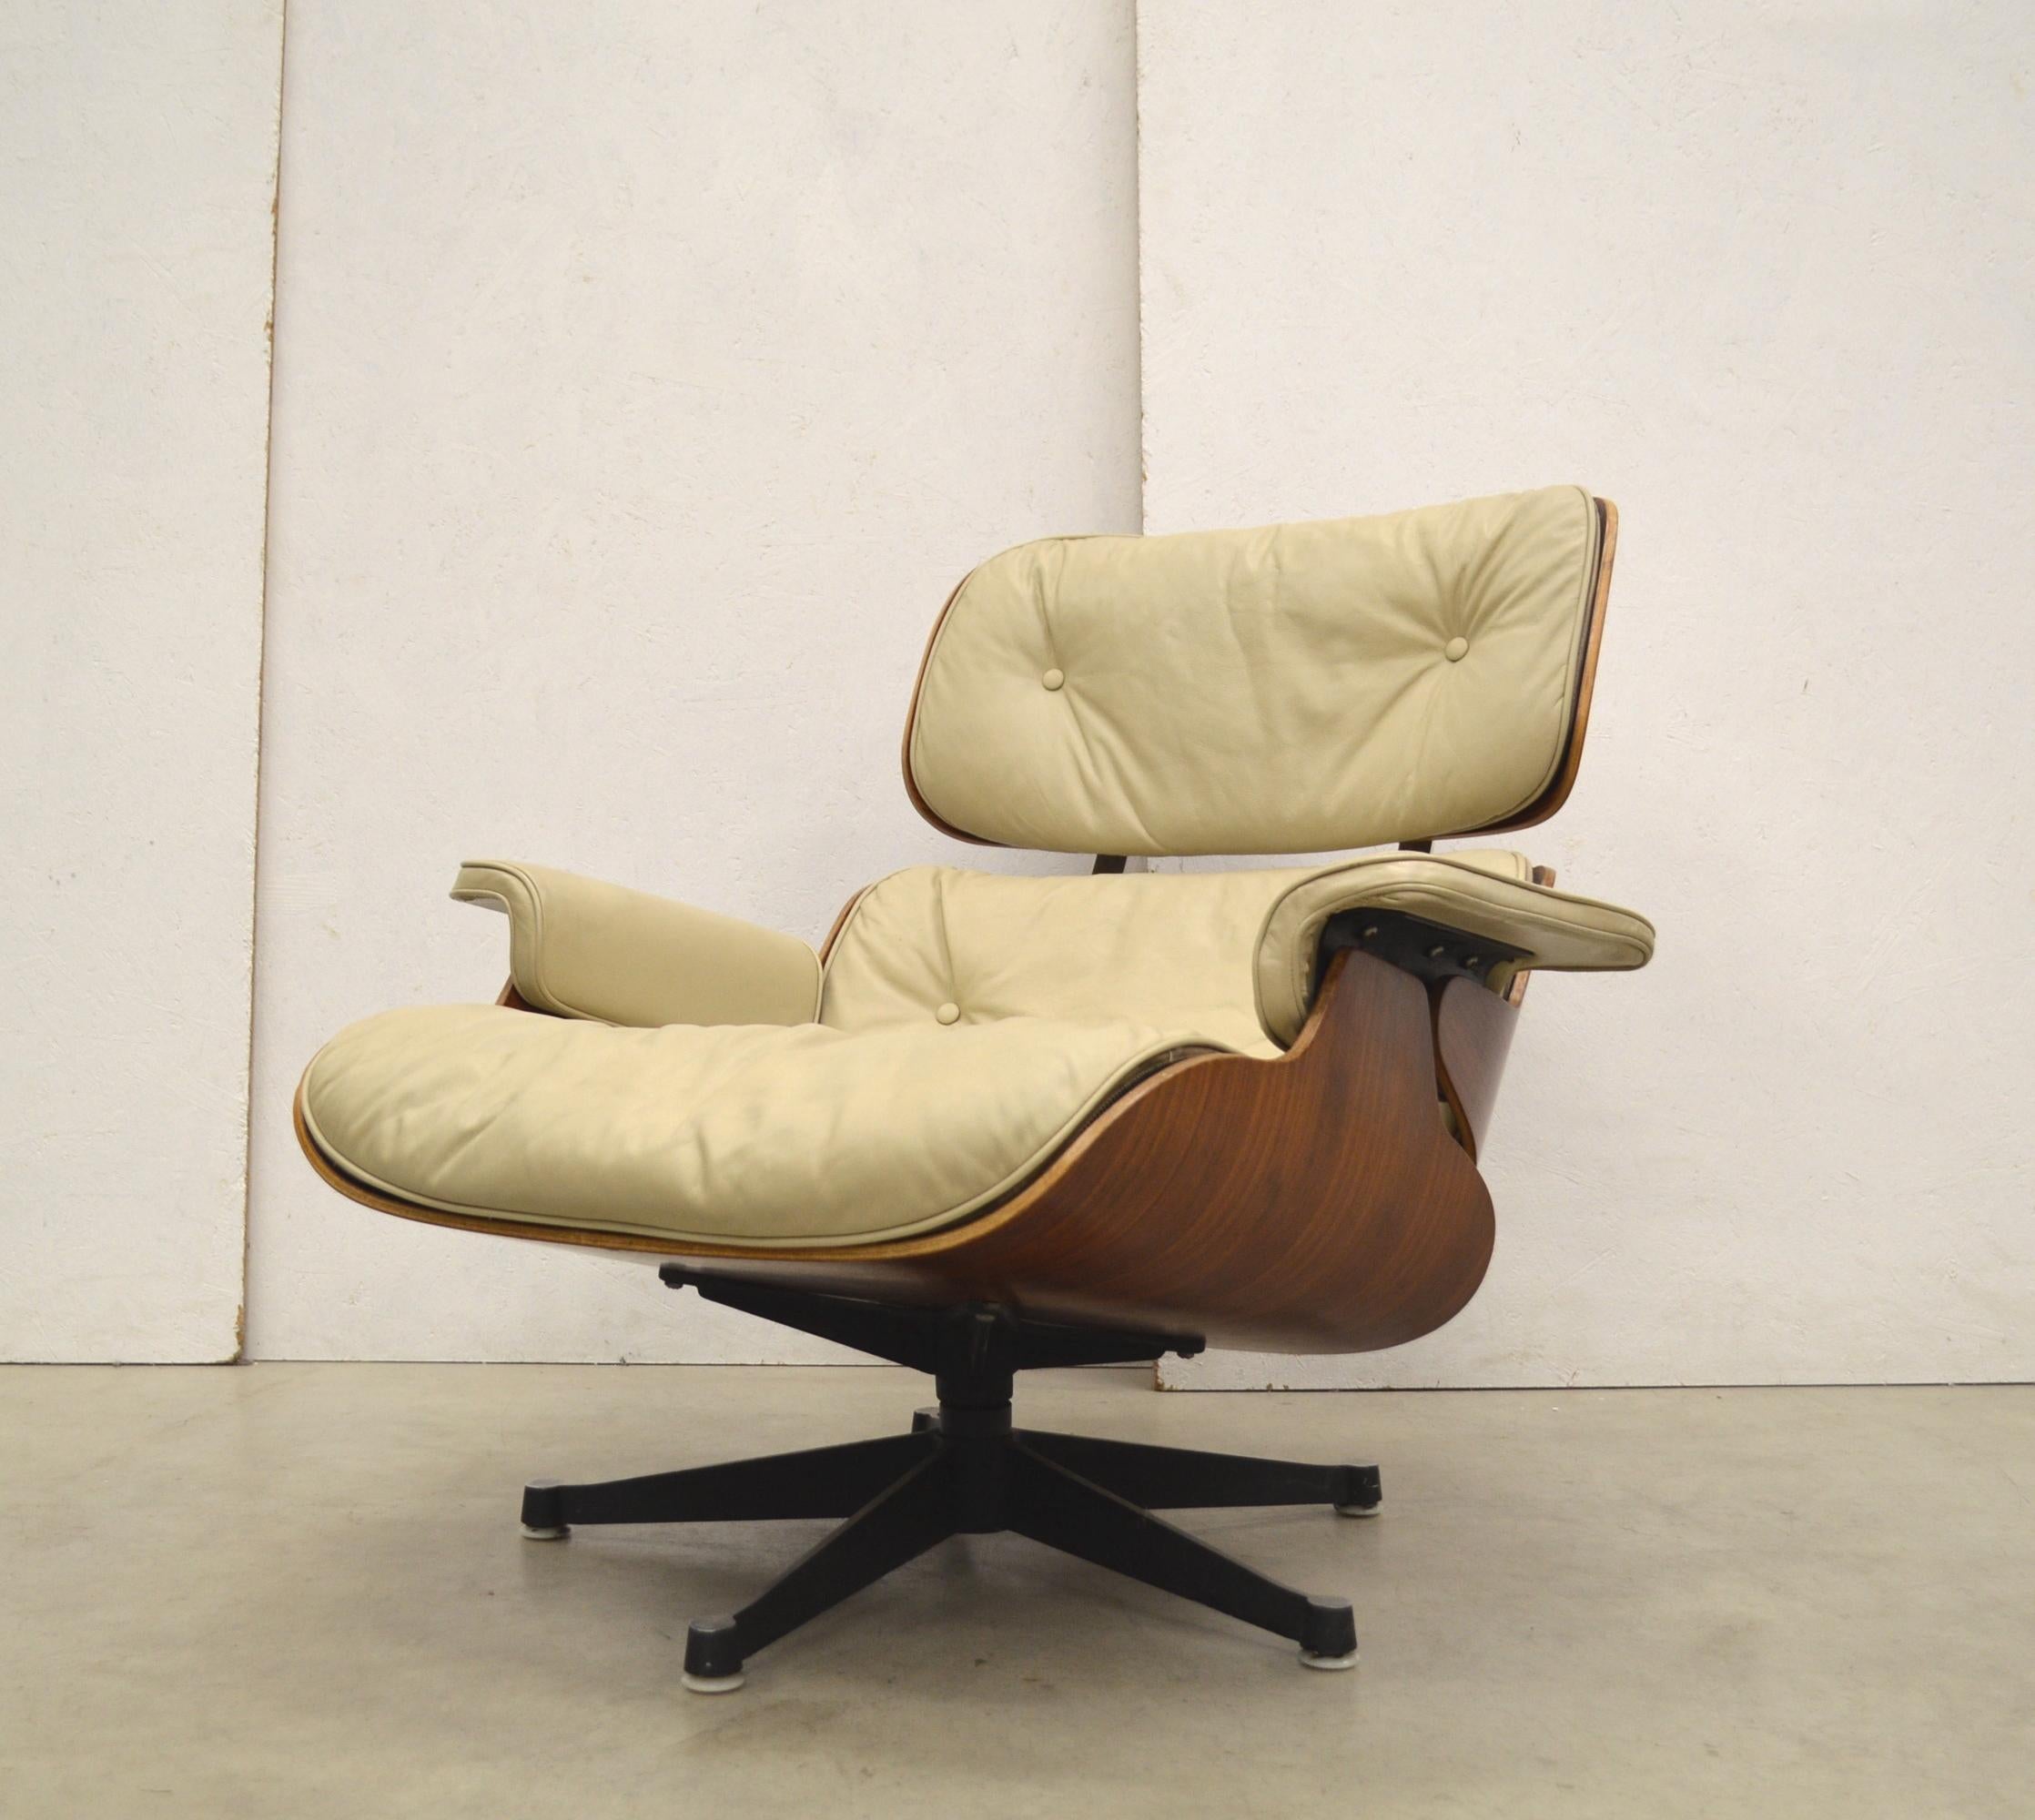 Hand-Crafted 1st European Edition Eames Lounge Chair Hille Herman Miller 1950s